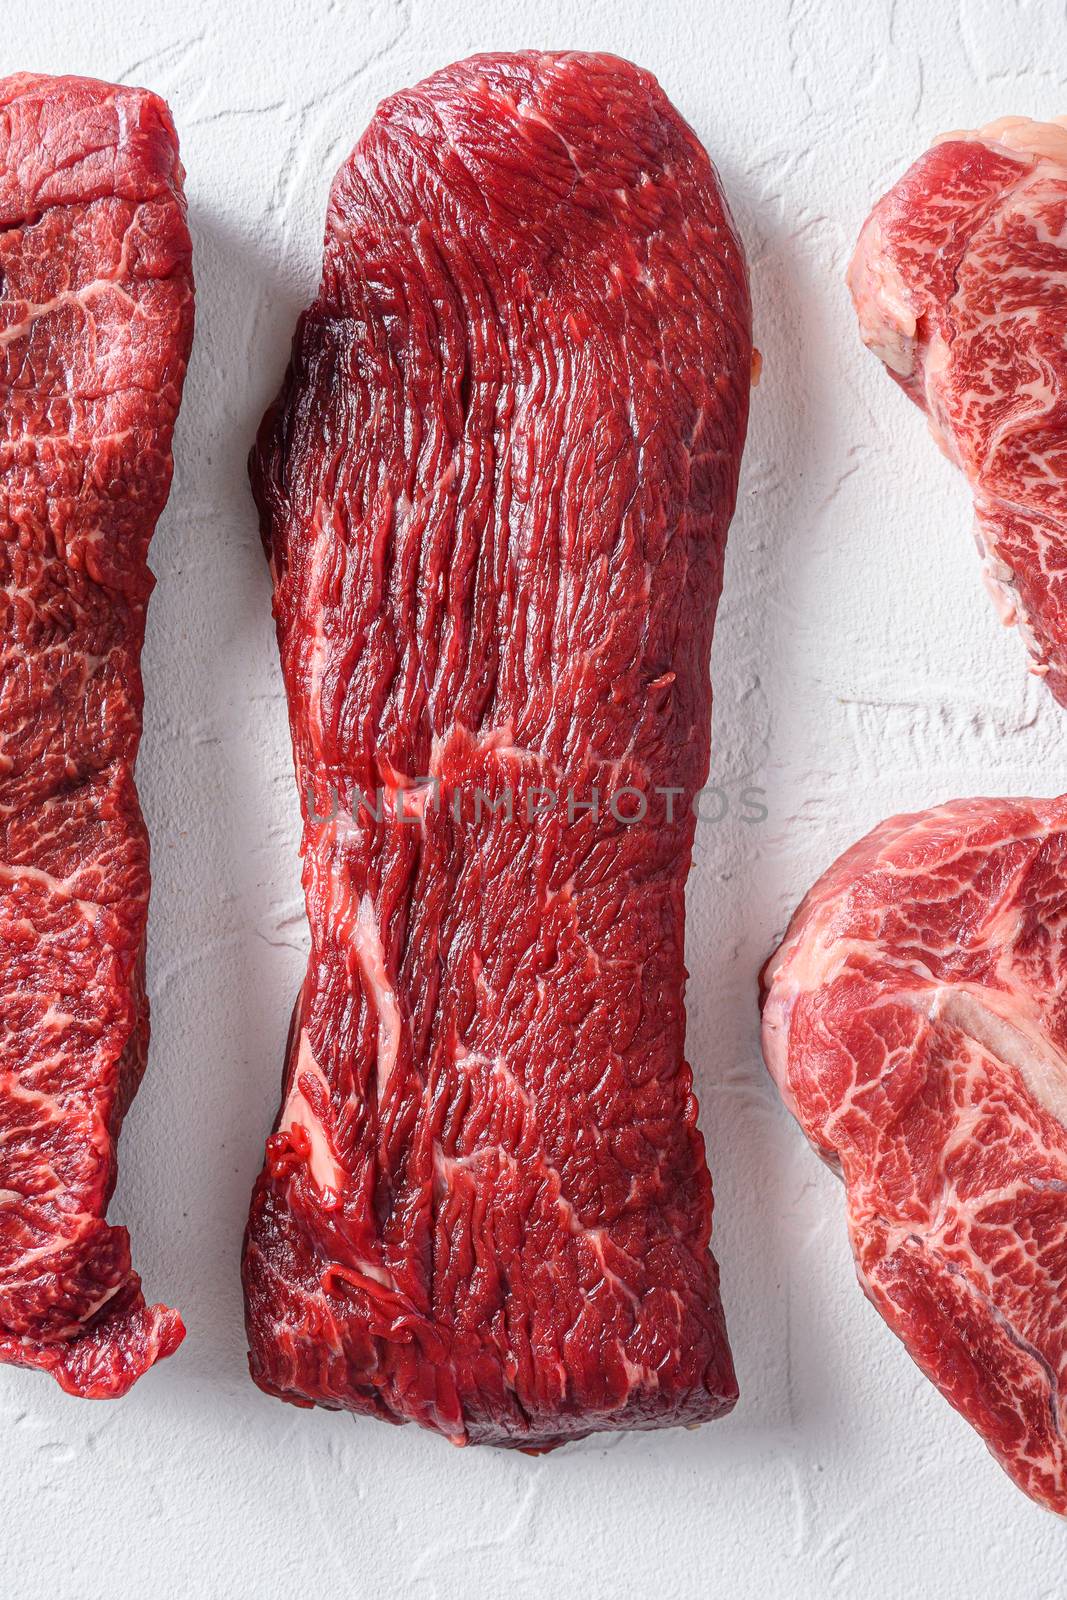 Raw tri-tip steak for BBQ cut organic meat cut top view close up over white concrete background vertical. by Ilianesolenyi